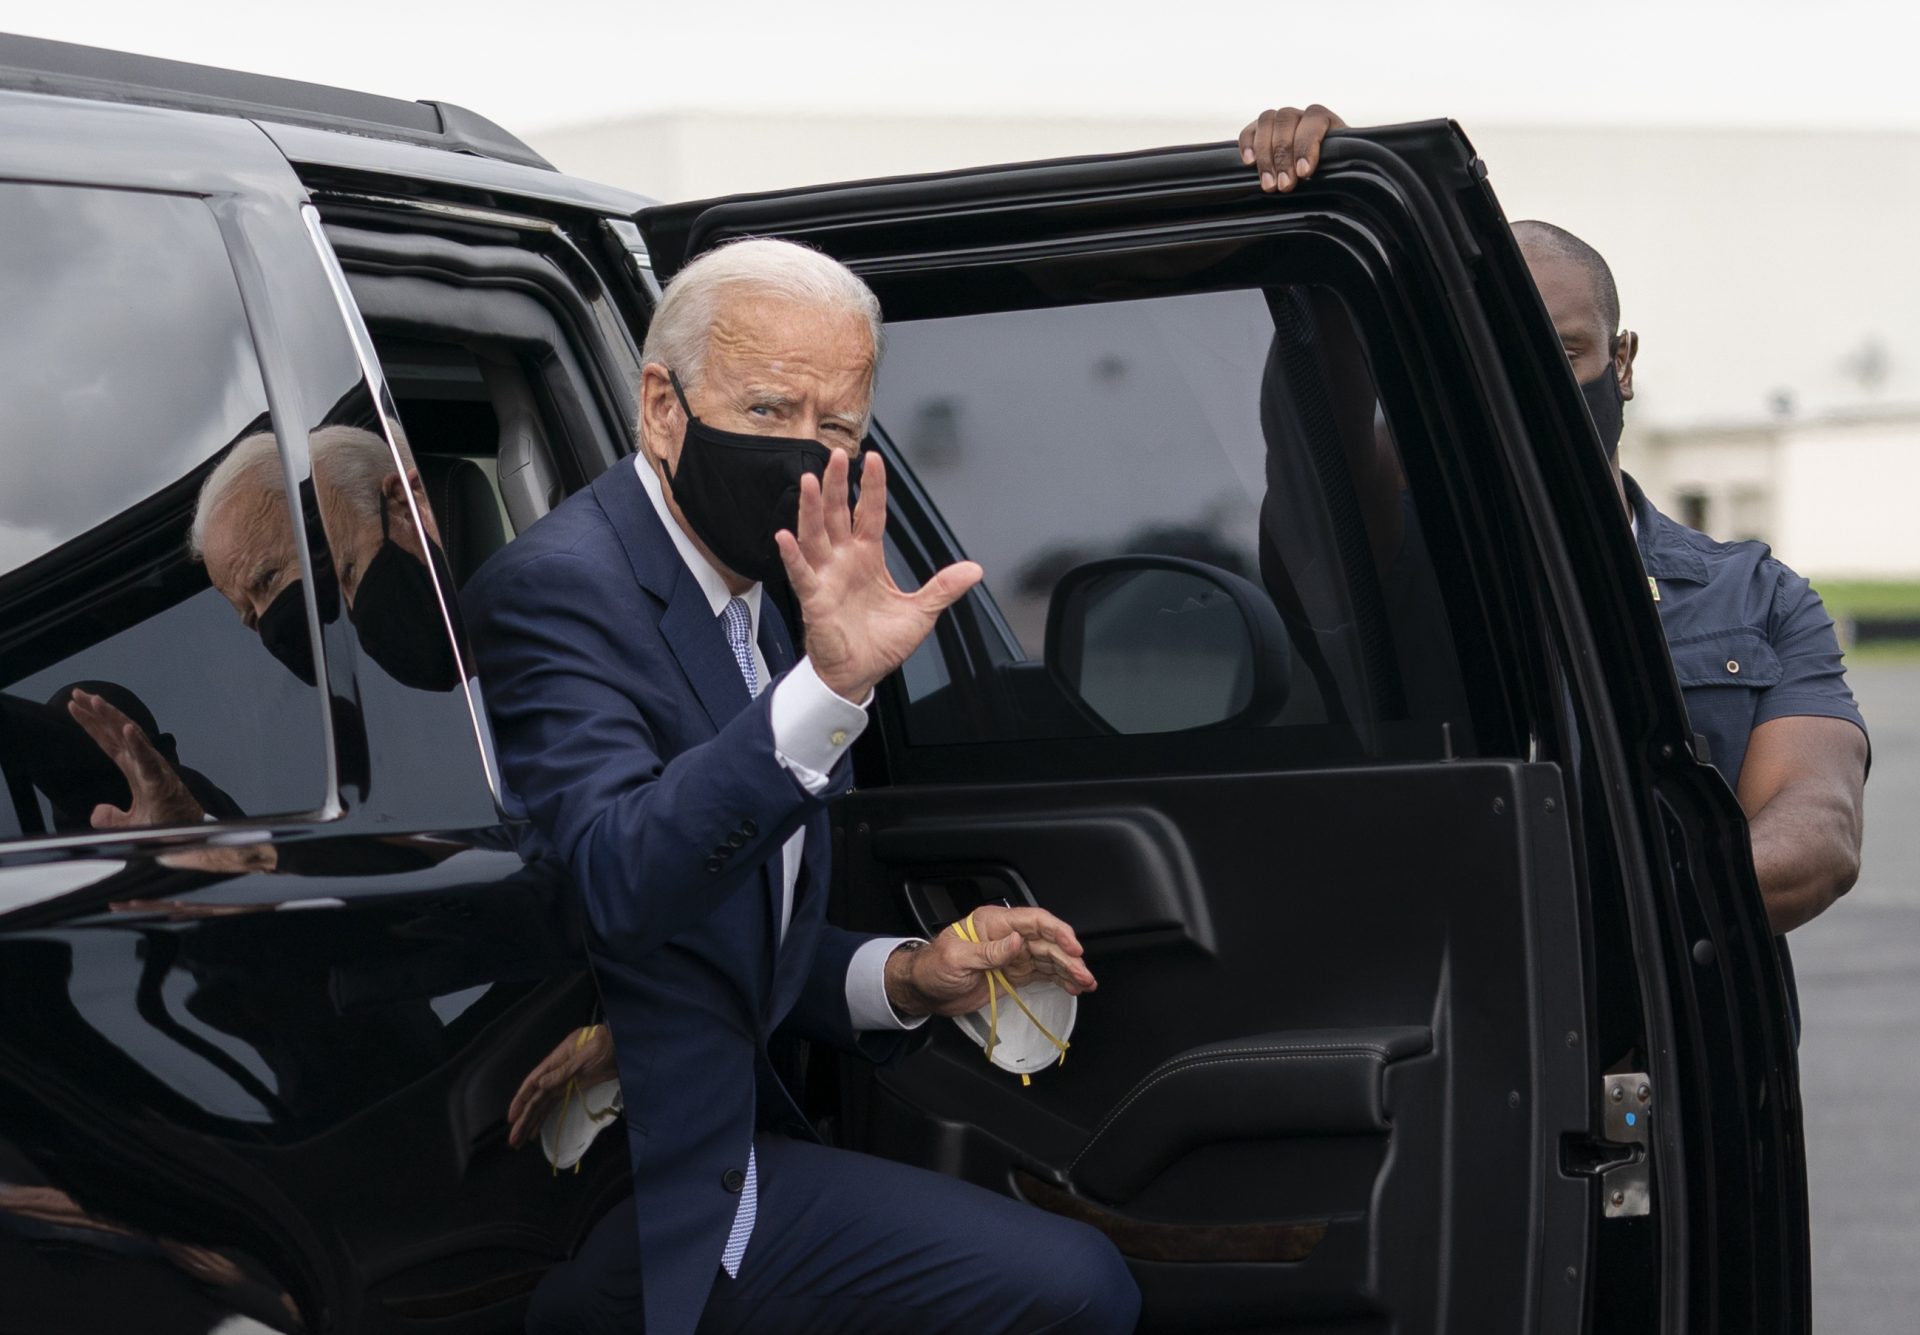 Democratic presidential candidate former Vice President Joe Biden arrives to board a plane at New Castle Airport, in New Castle, Del., en route to speak at a campaign event in Pittsburgh, Pa., Monday, Aug. 31, 2020.